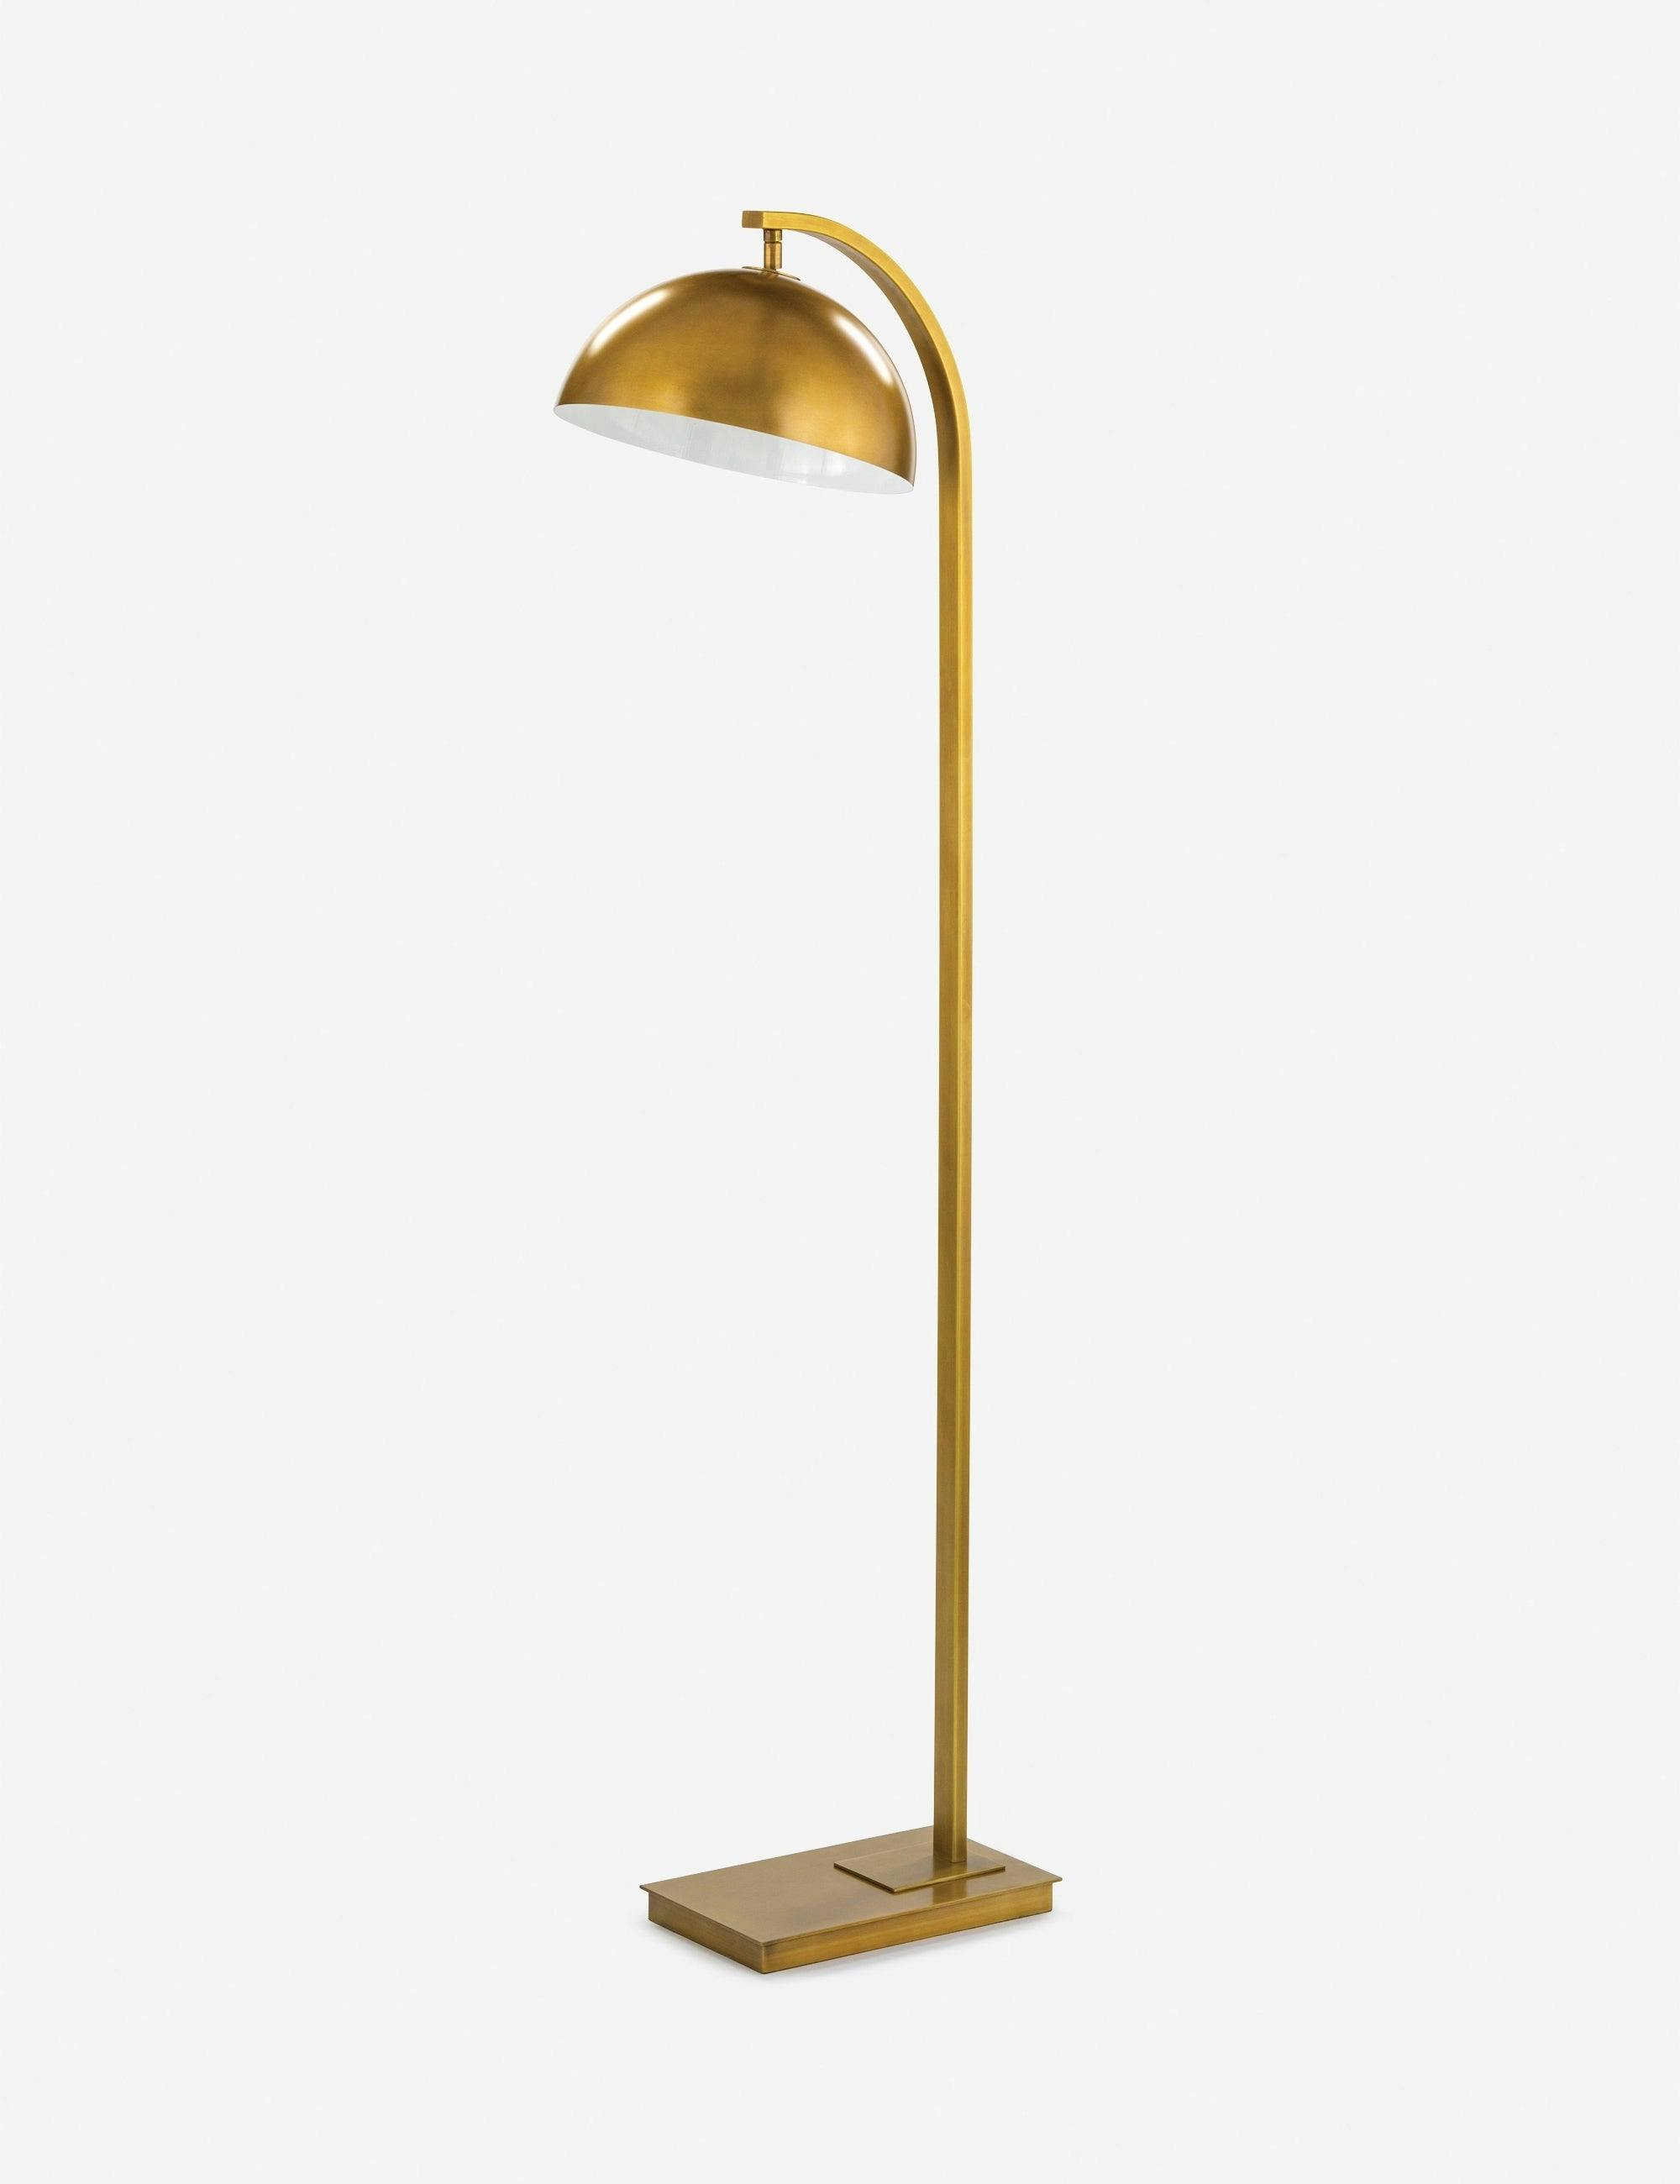 Otto Natural Brass Arc Floor Lamp with Adjustable Dome Shade